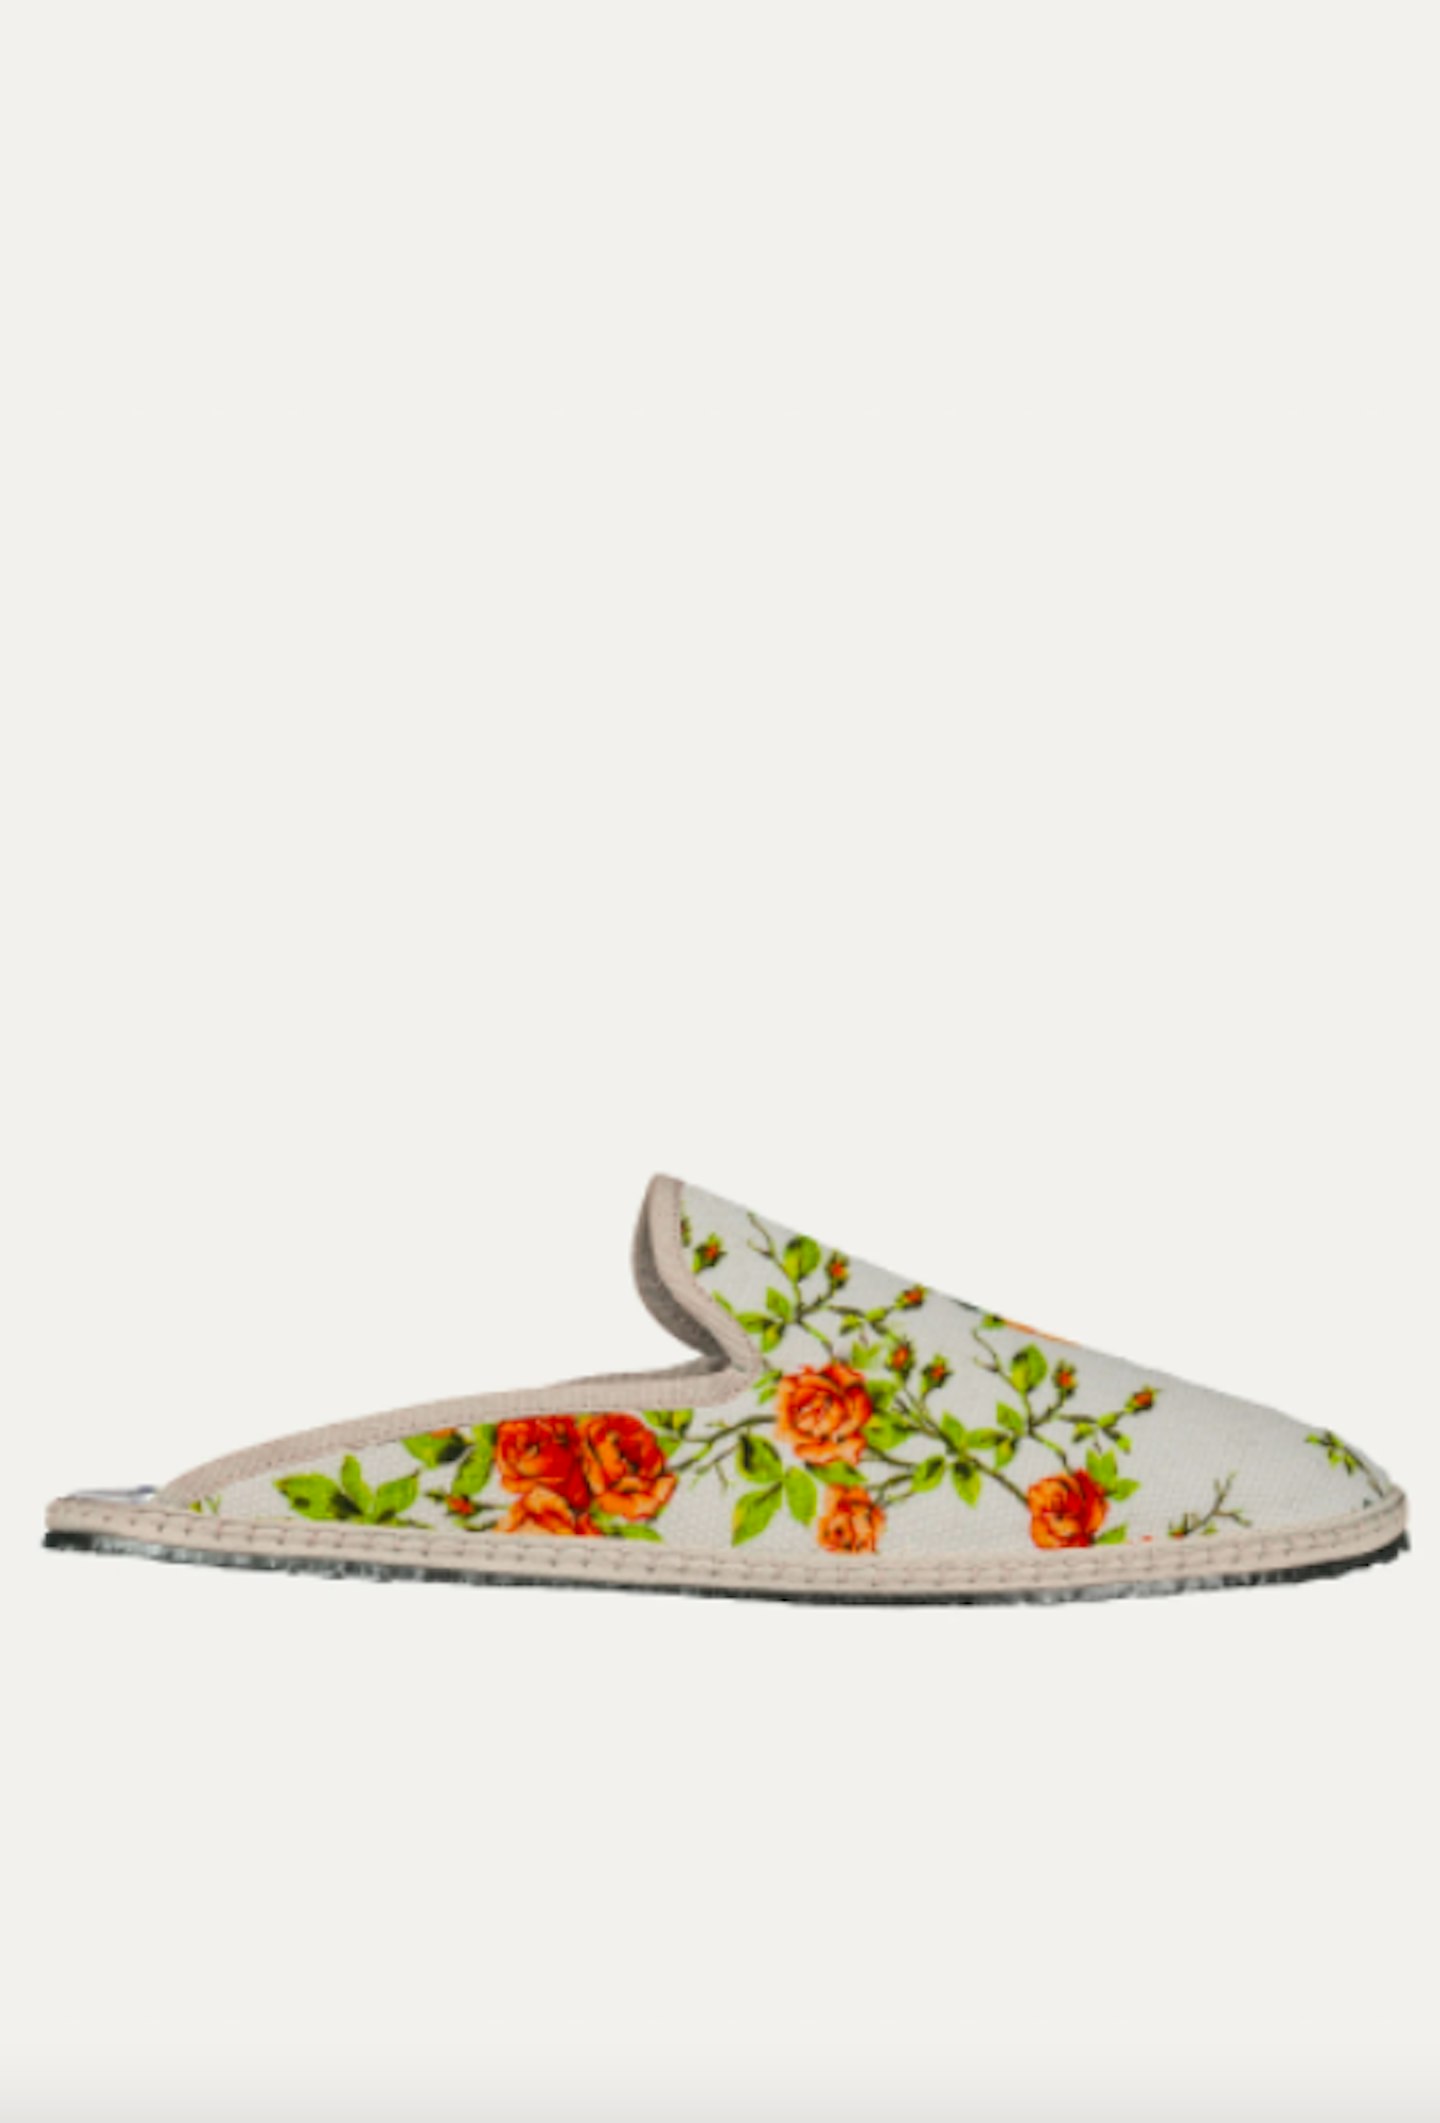 Sabot Shoe in Mixed Floral, £140